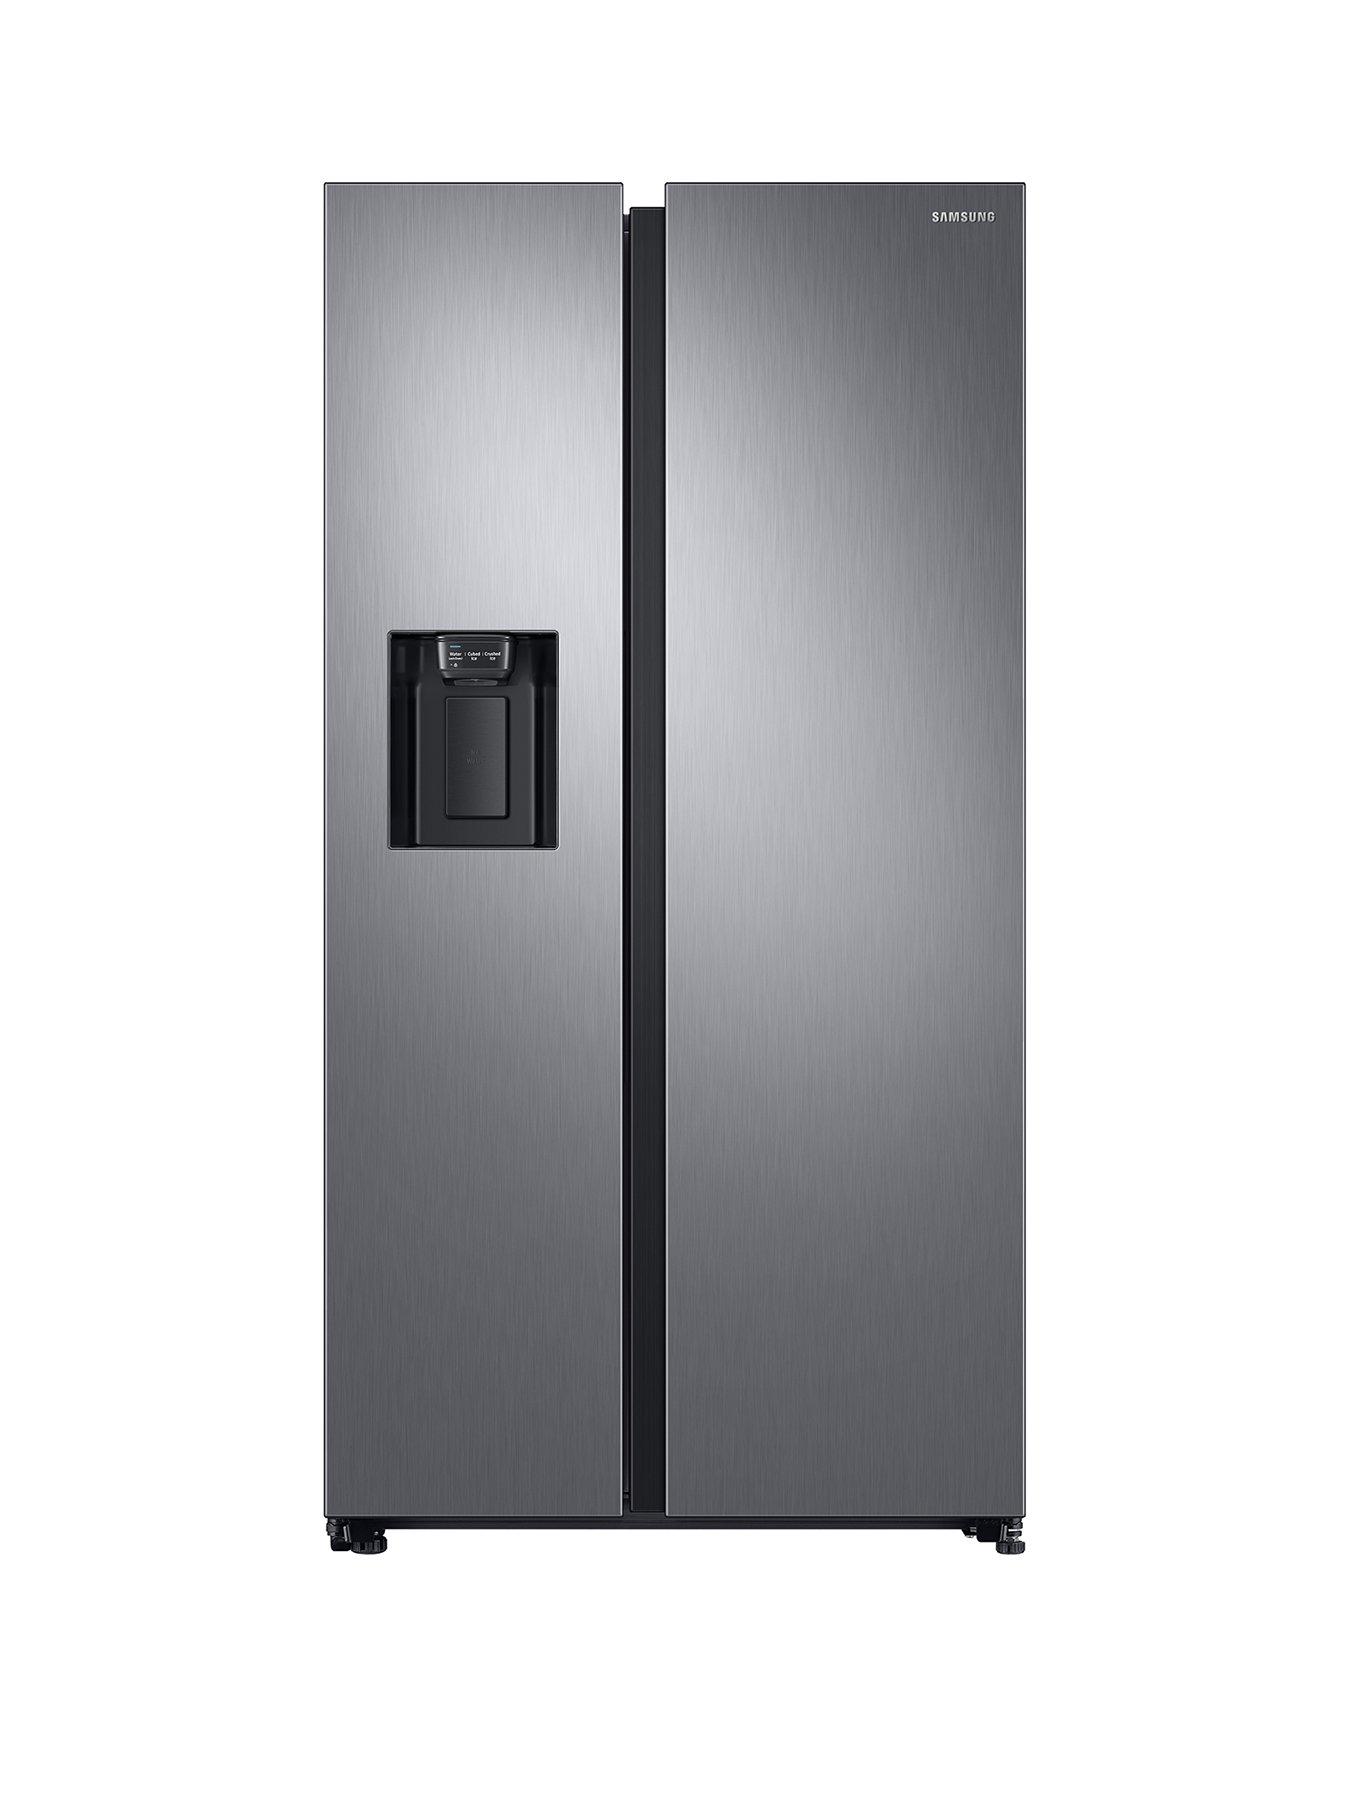 Samsung Rs68N8240S9/Eu American Style Frost Free Fridge Freezer With Plumbed Water, Ice Dispenser And 5 Year Samsung Parts And Labour Warranty – Matt Silver